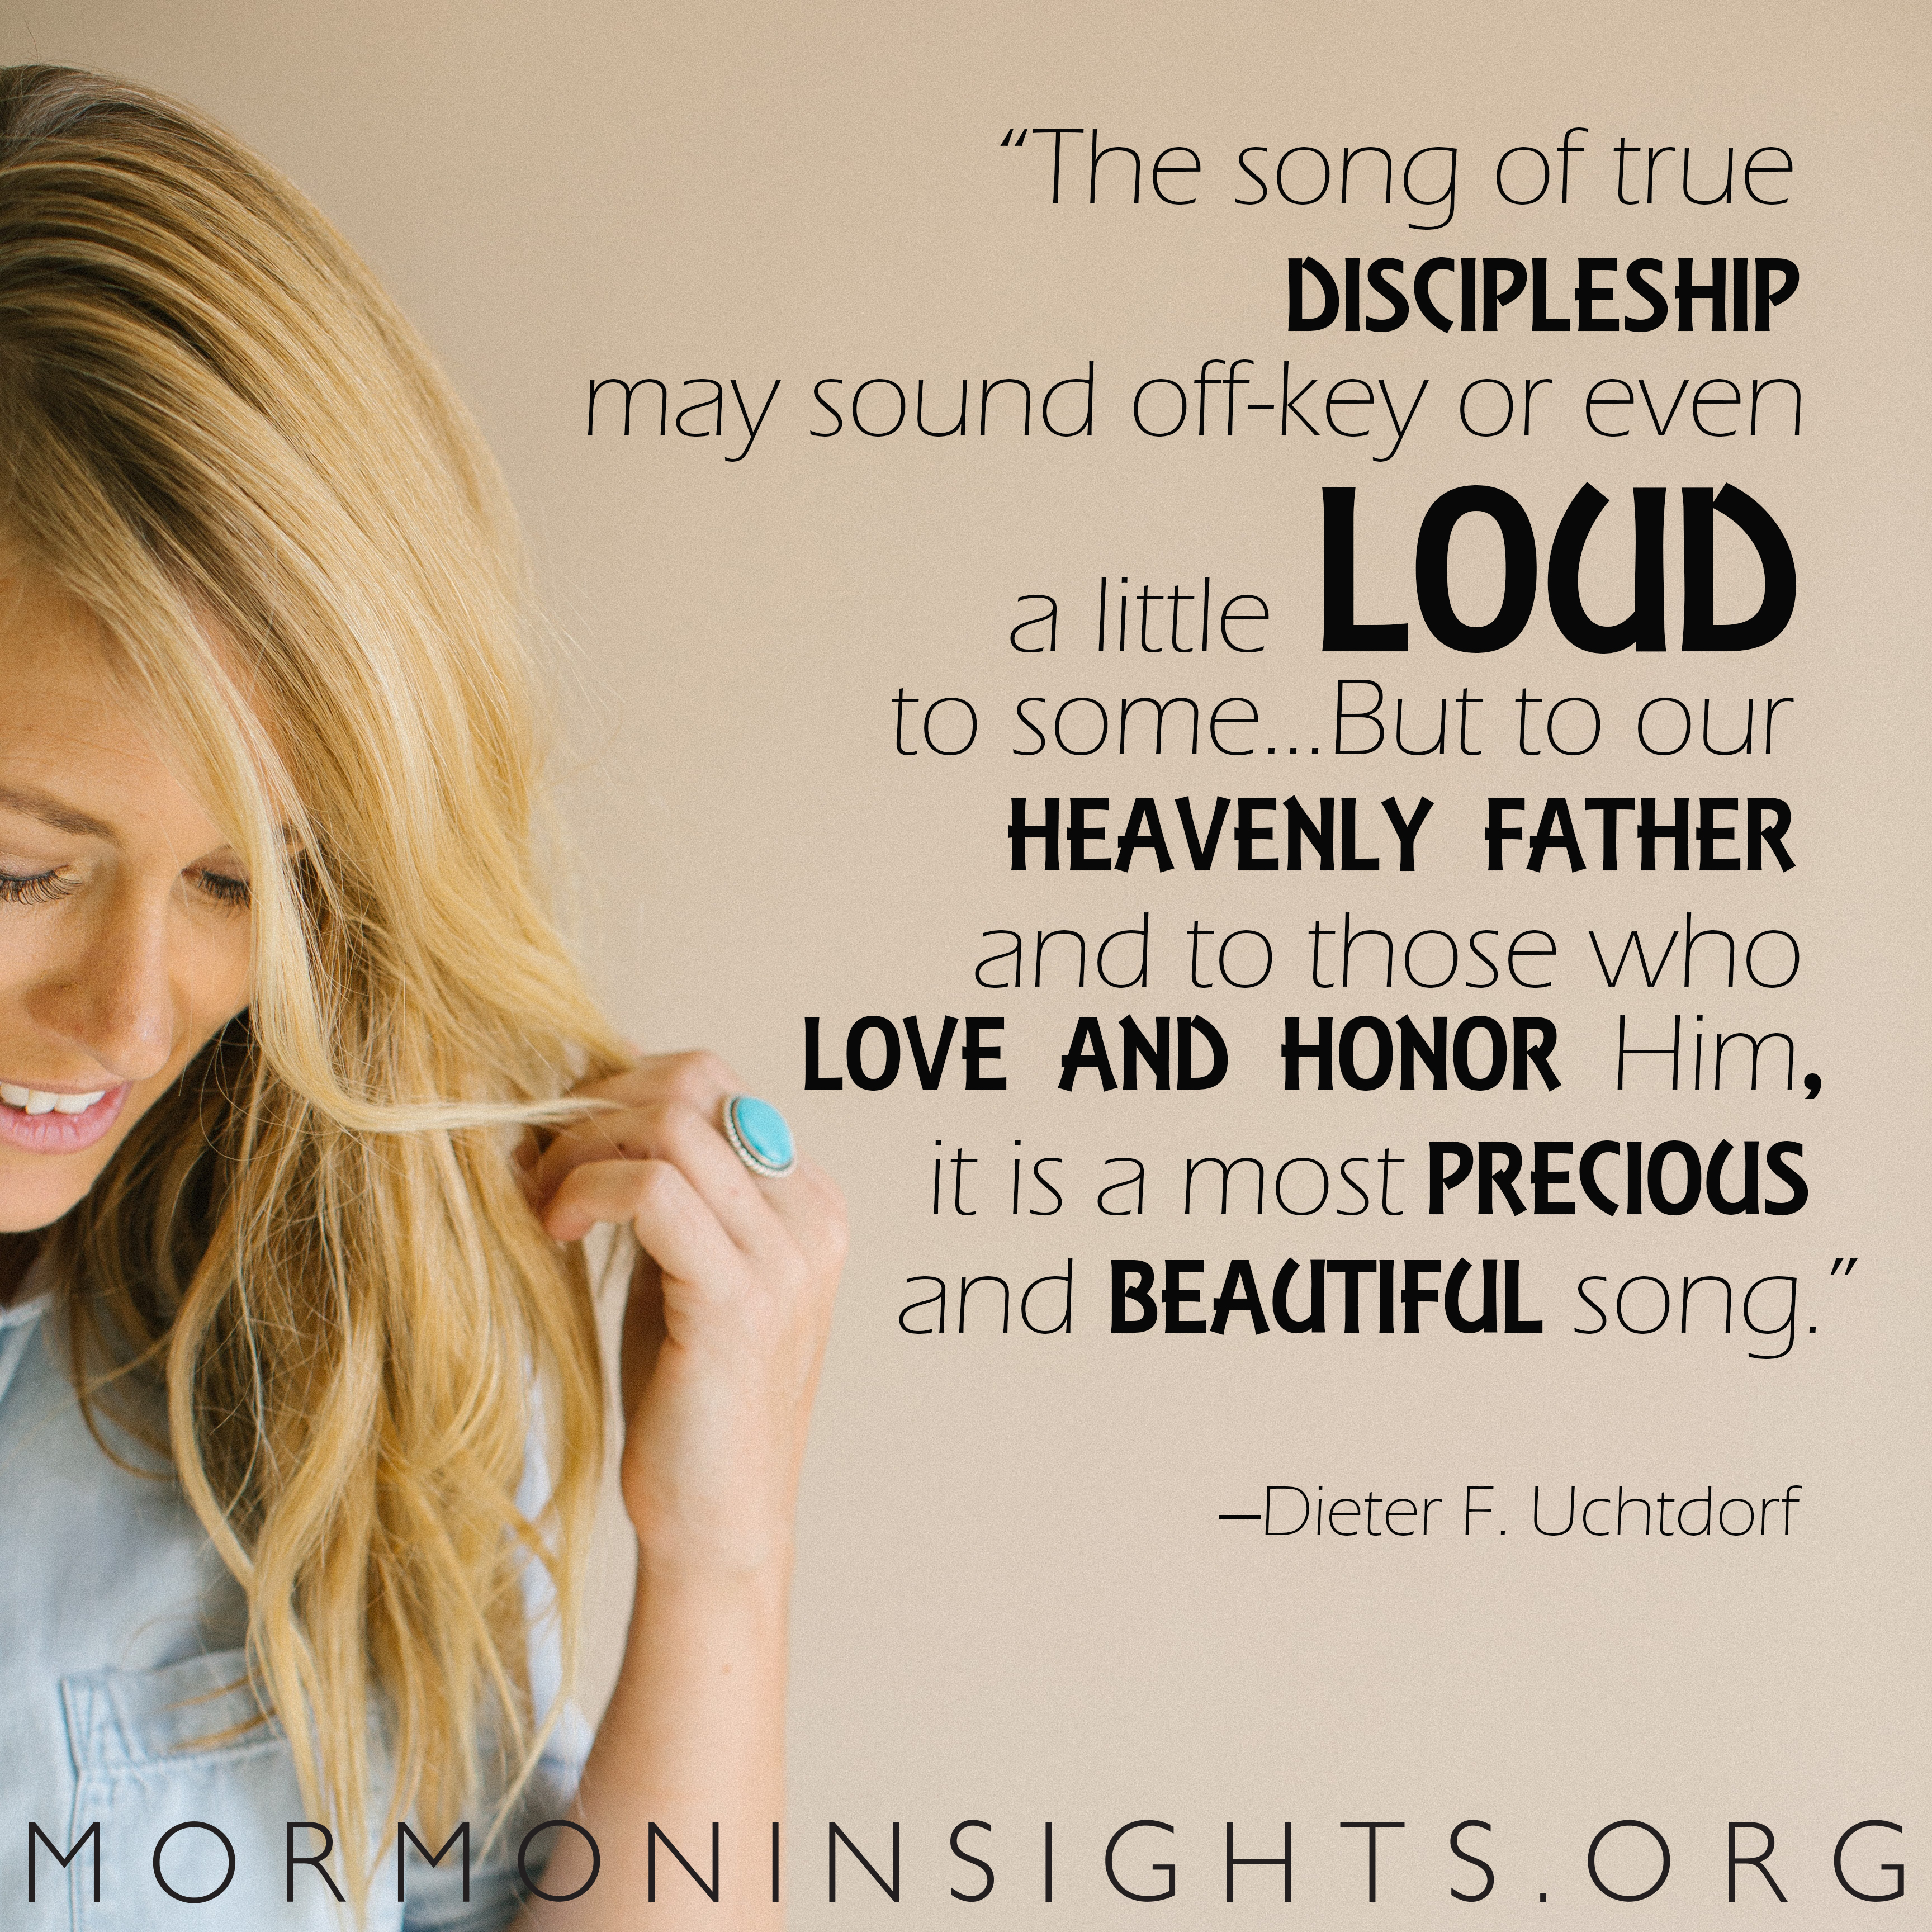 "The song of discipleship may sound off-key or even a little loud to some ... But to our Heavenly Father and to those who love and honor him, it is a most precious and beautiful song" -Dieter F. Uchtdorf